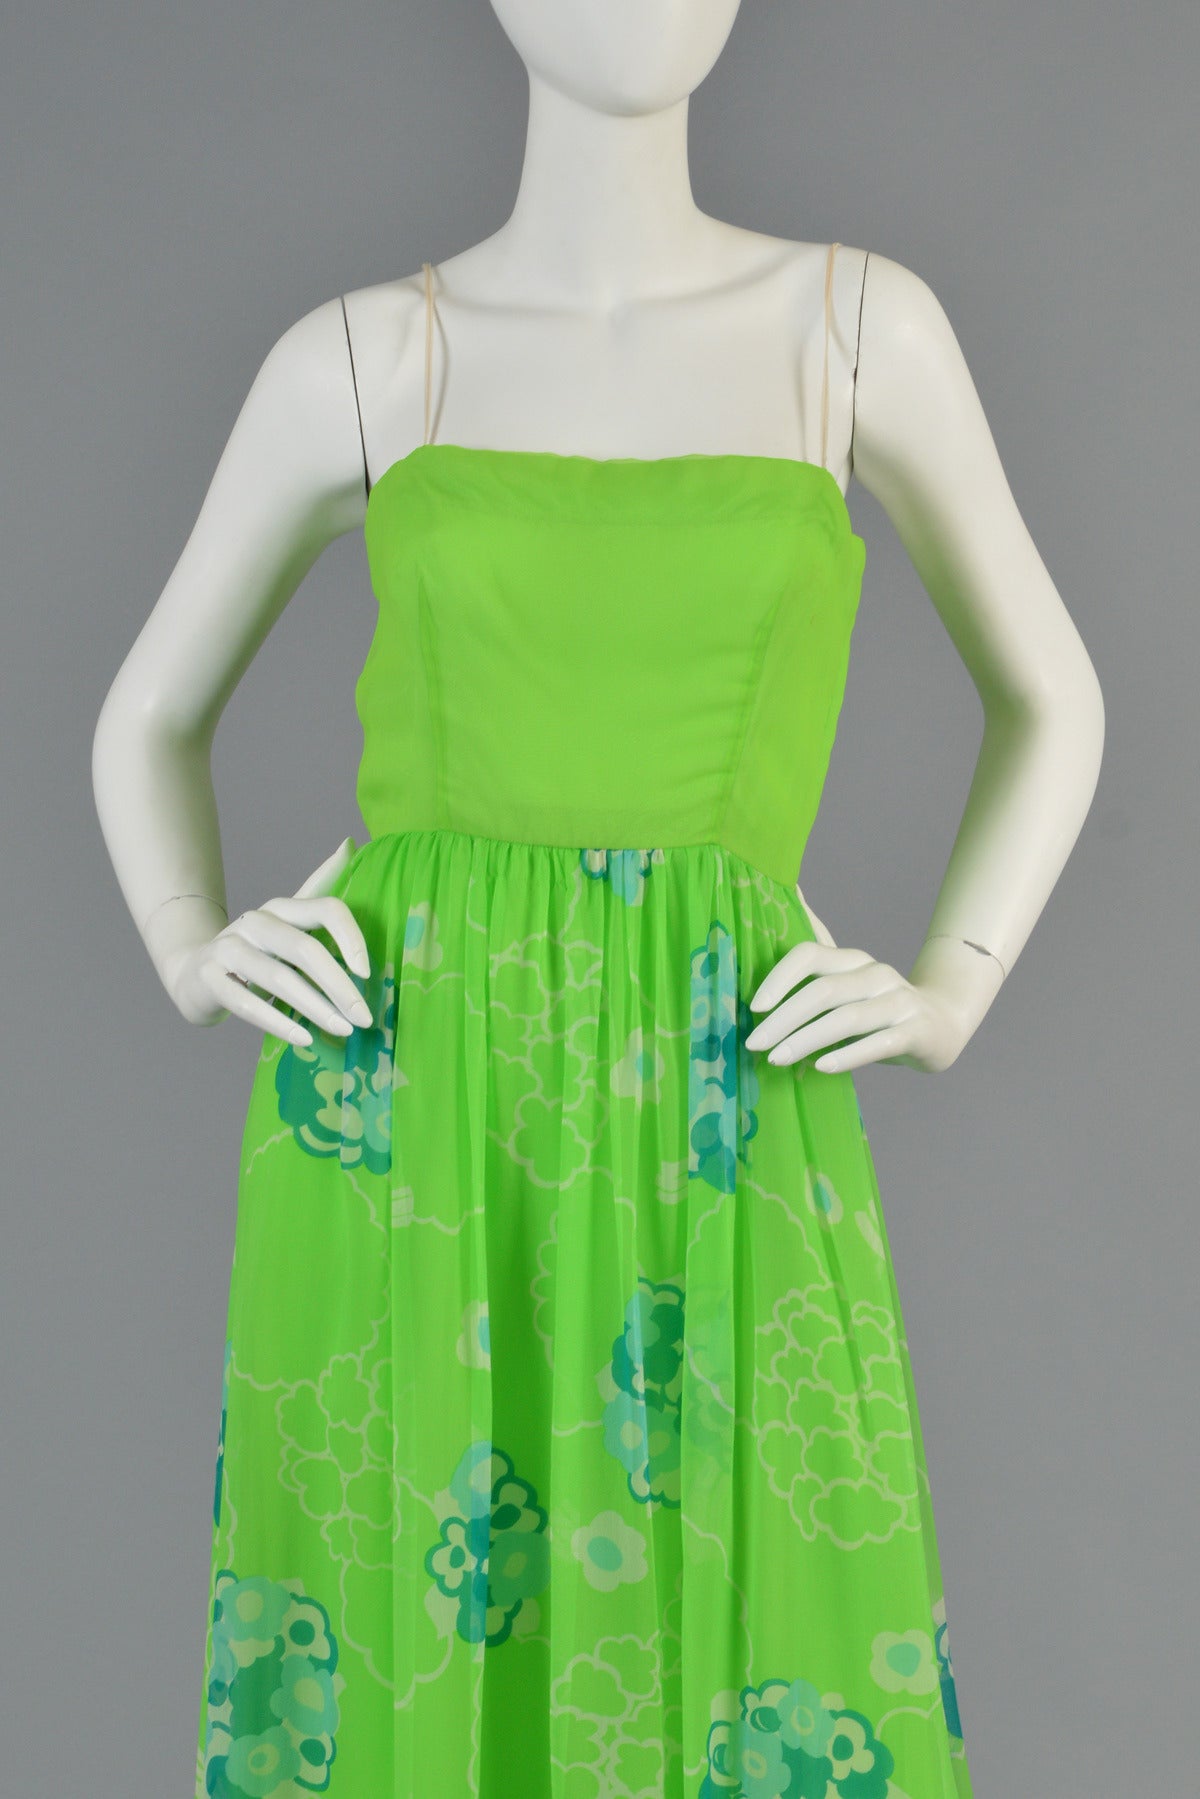 Women's Adele Simpson 1970's 3pc Silk Chiffon Floral Gown For Sale